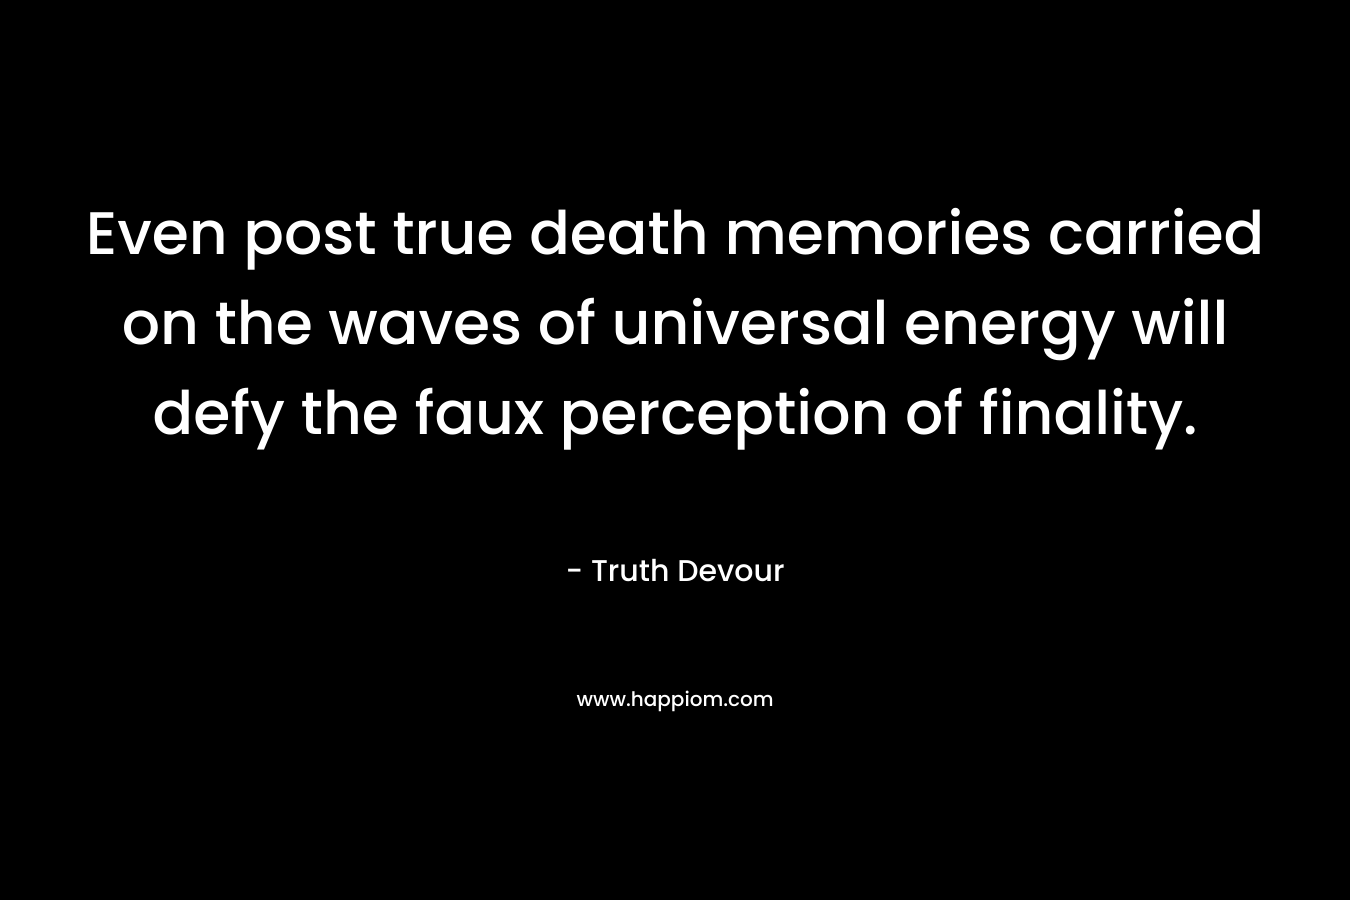 Even post true death memories carried on the waves of universal energy will defy the faux perception of finality. – Truth Devour